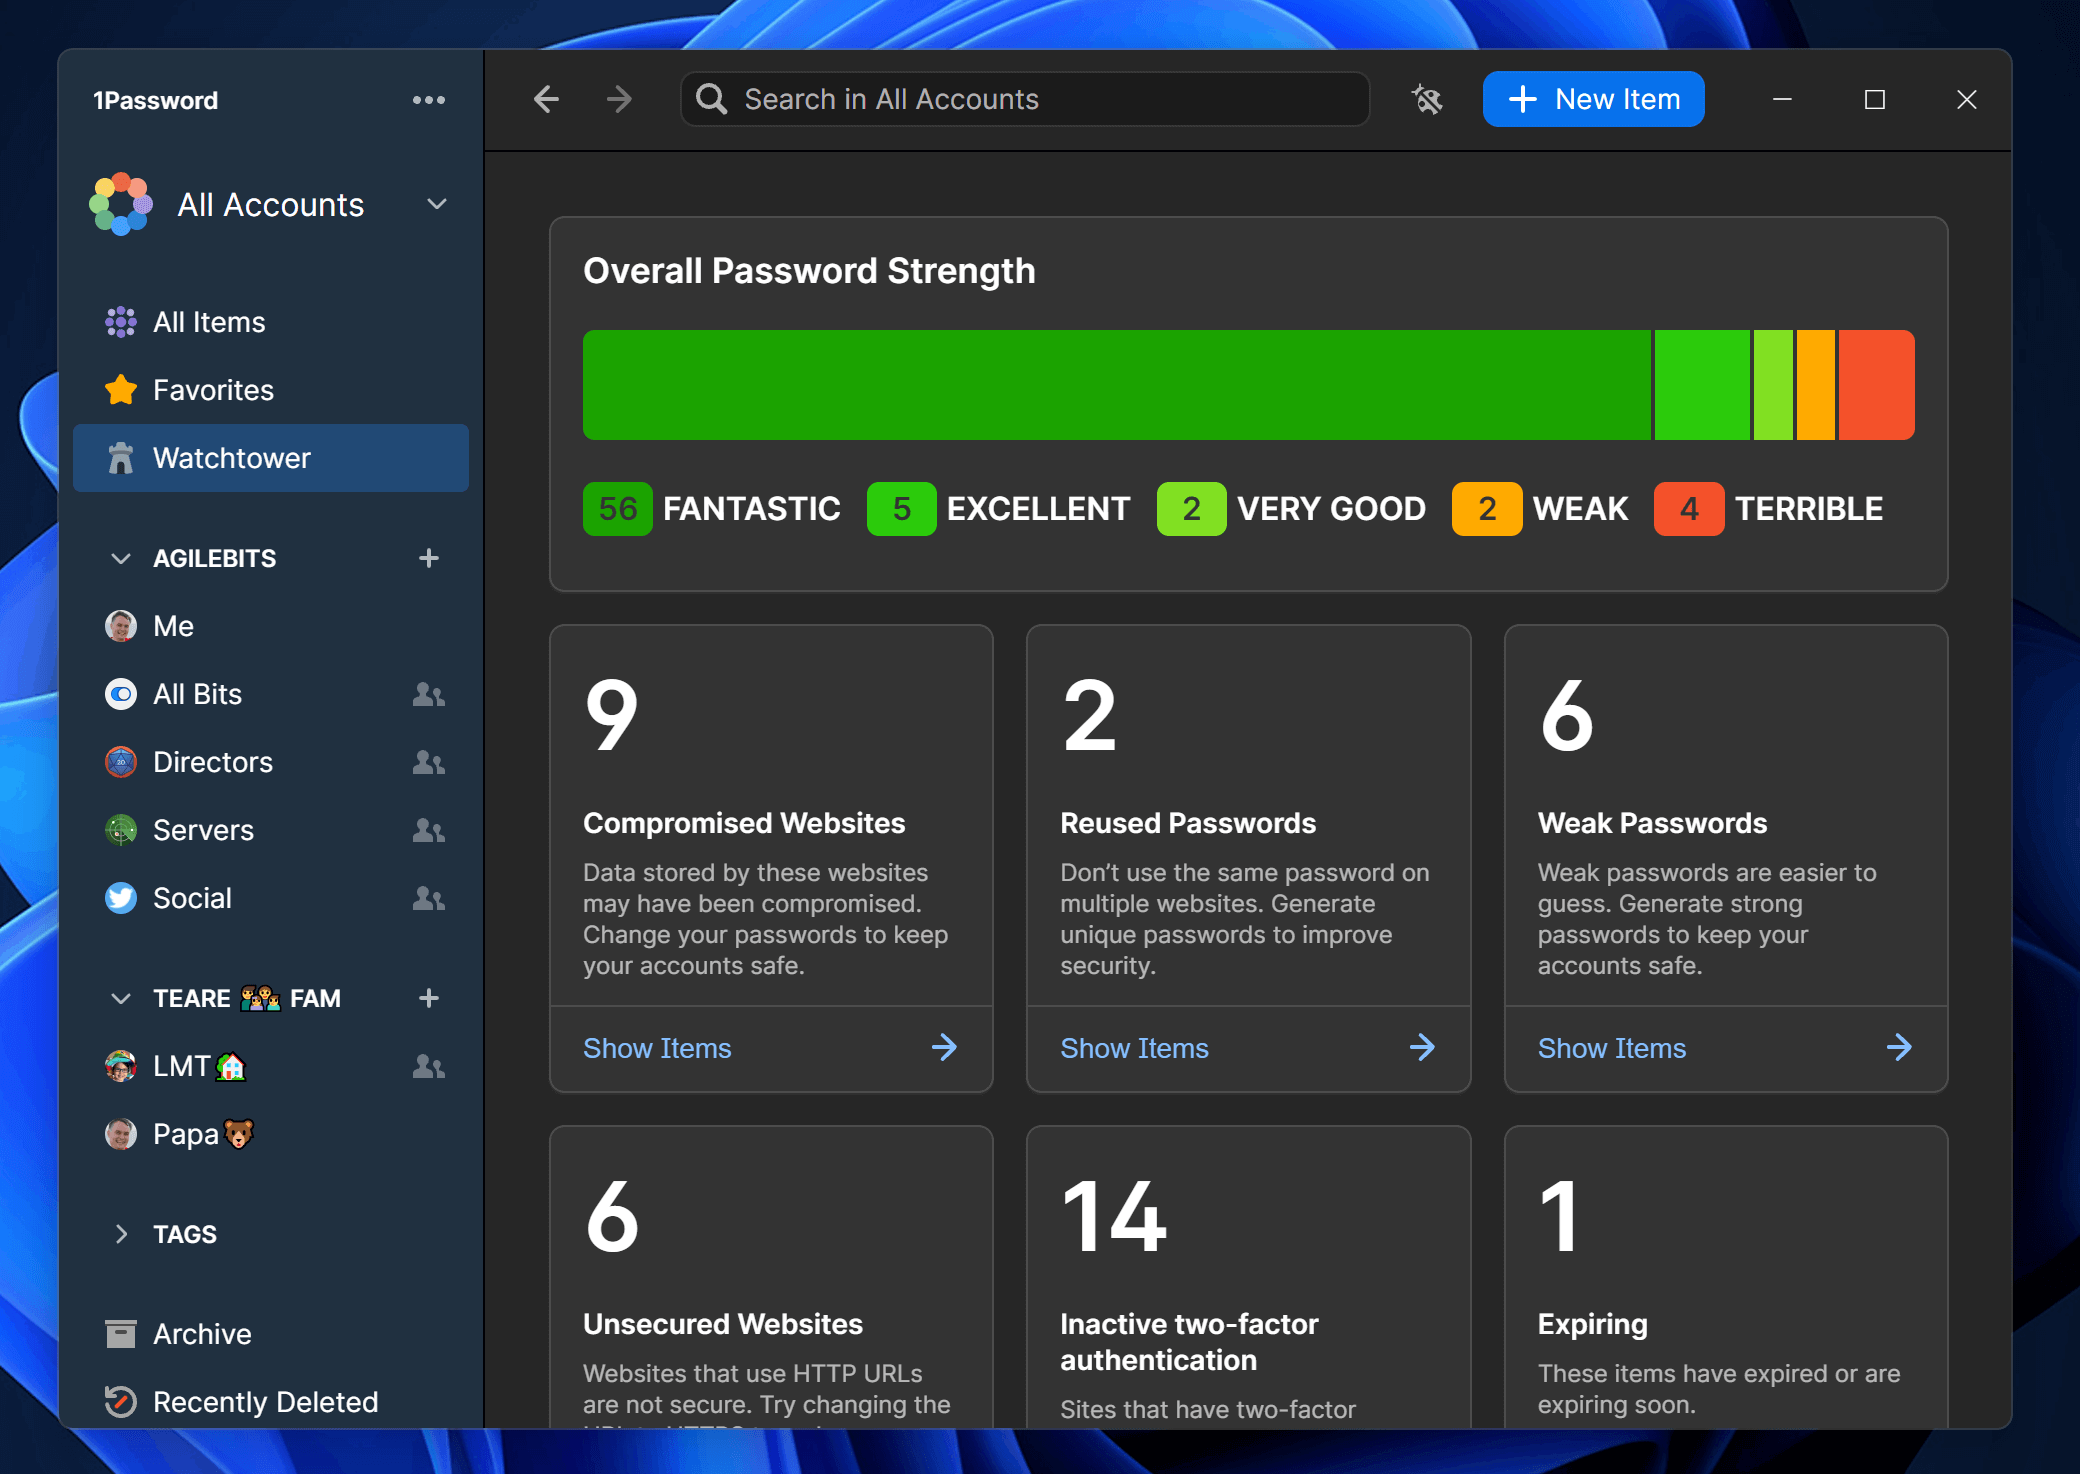 Watchtower Dashboard showing the overall password strength and weak passwords that need attention.